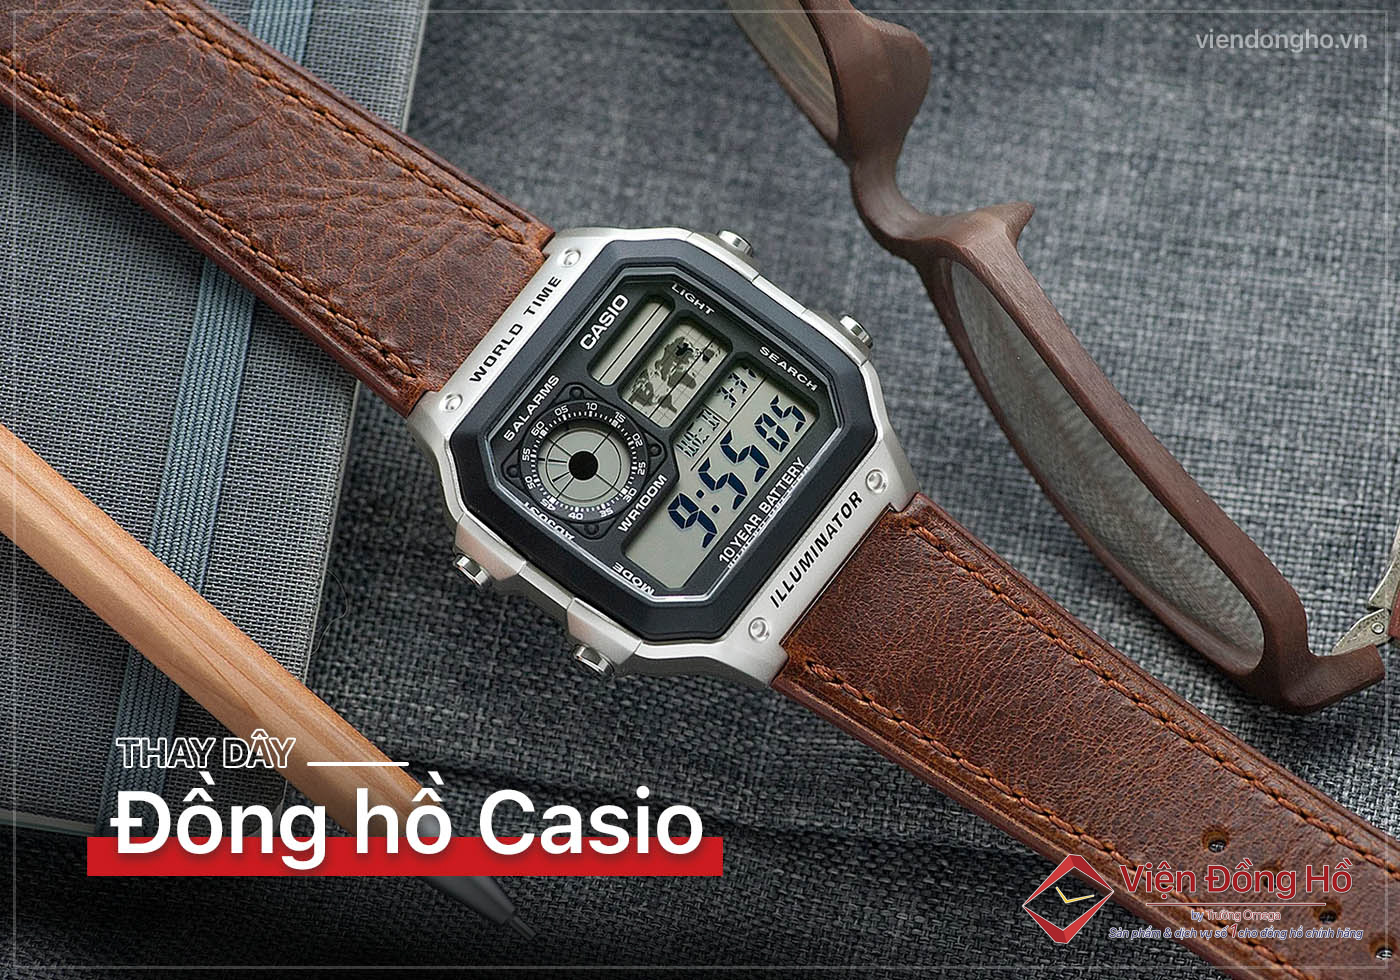 Thay day dong ho Casio 5